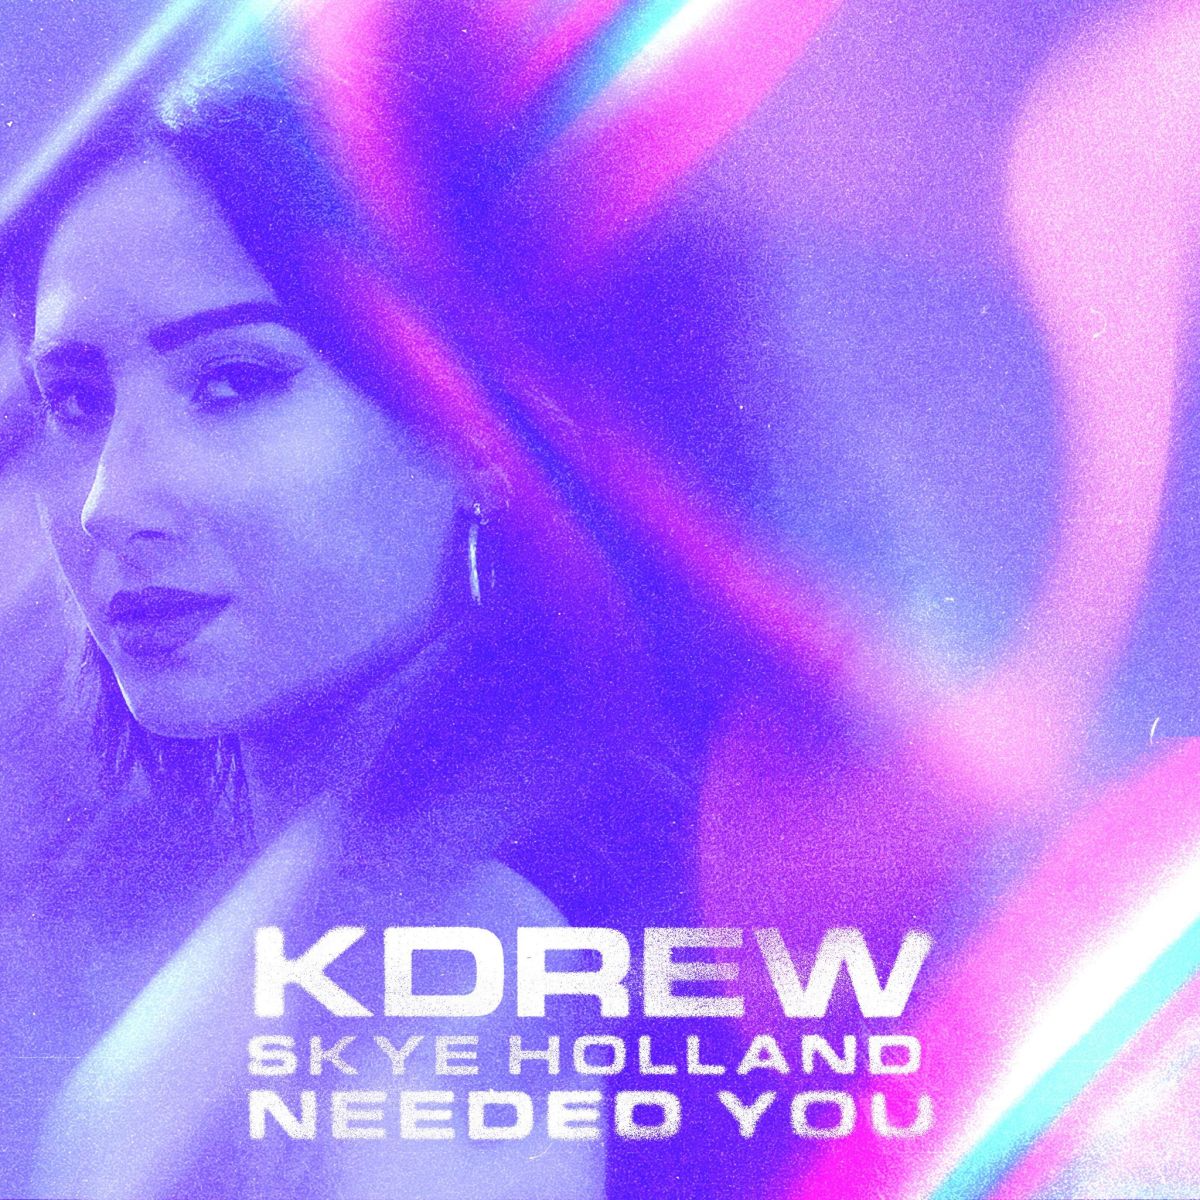 Cover art of KDrew and Skye Holland's single, "Needed You."